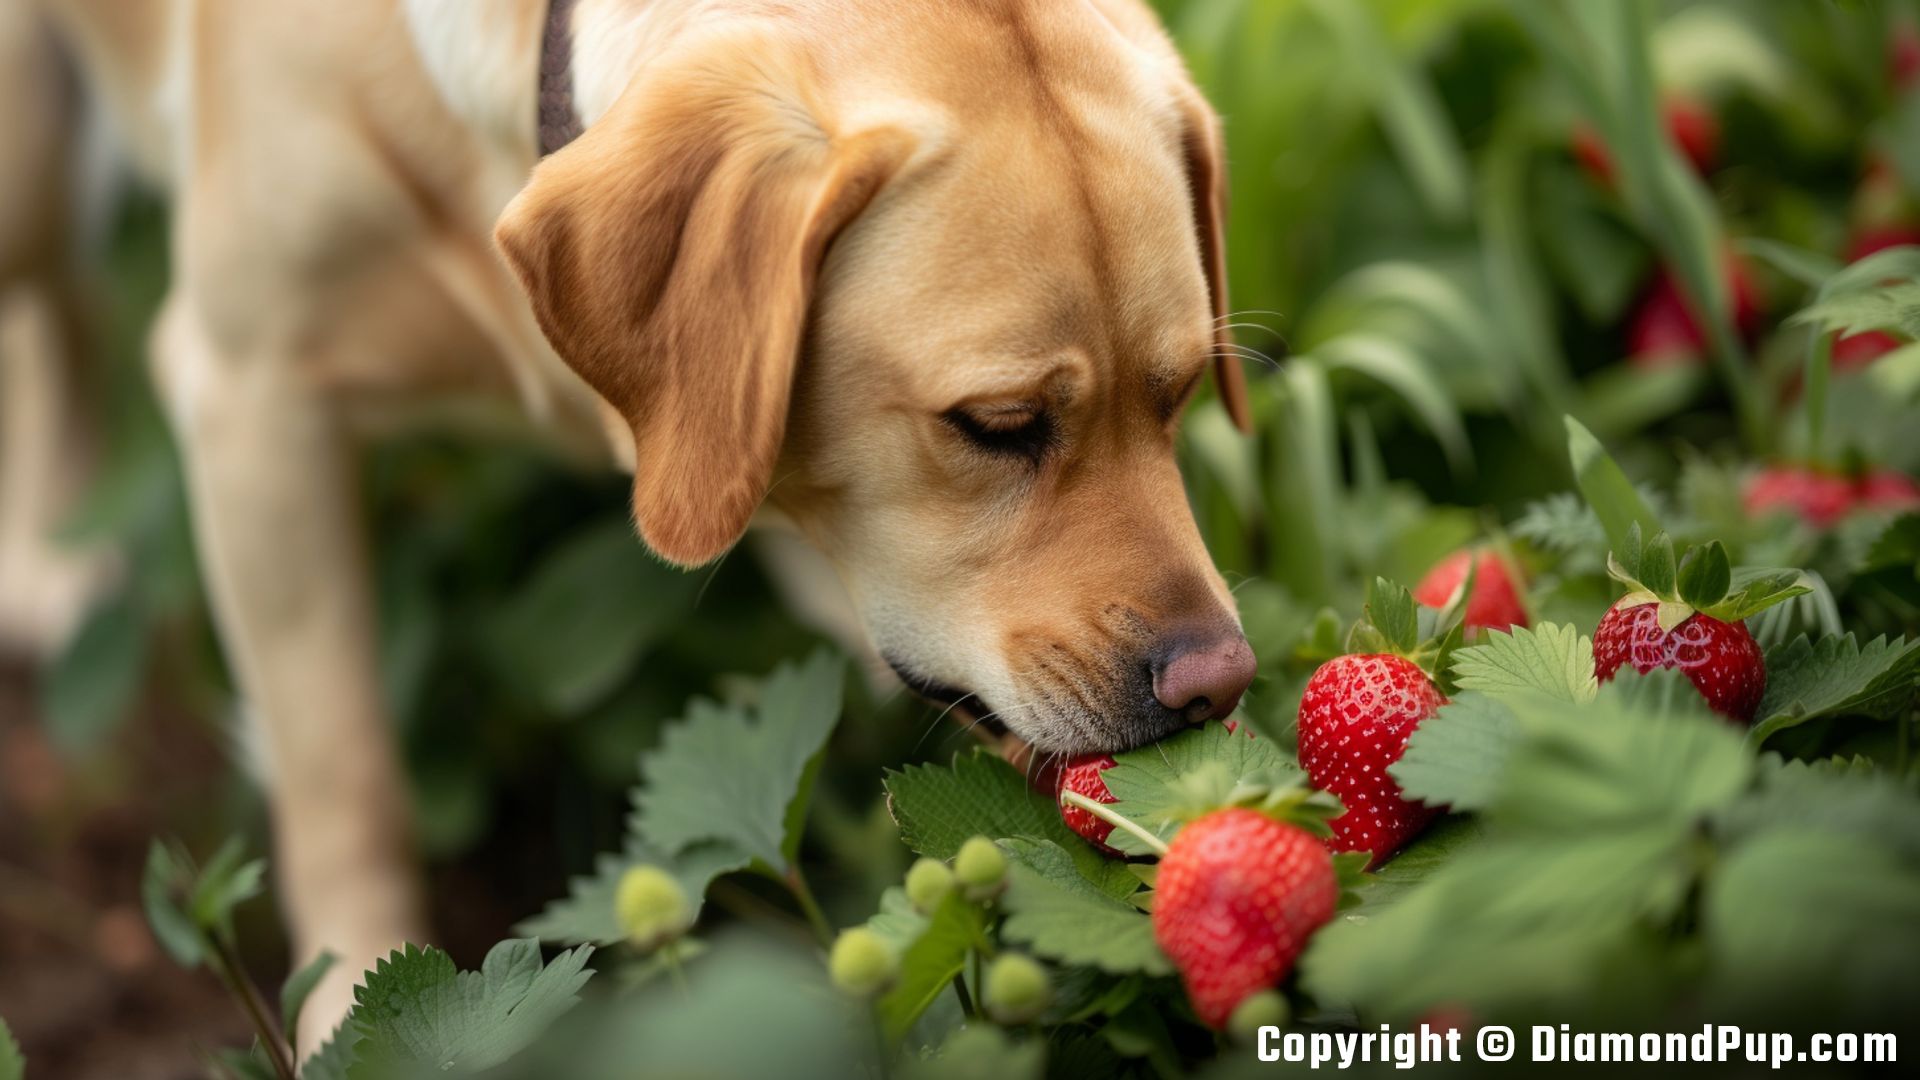 Photograph of a Cute Labrador Eating Strawberries